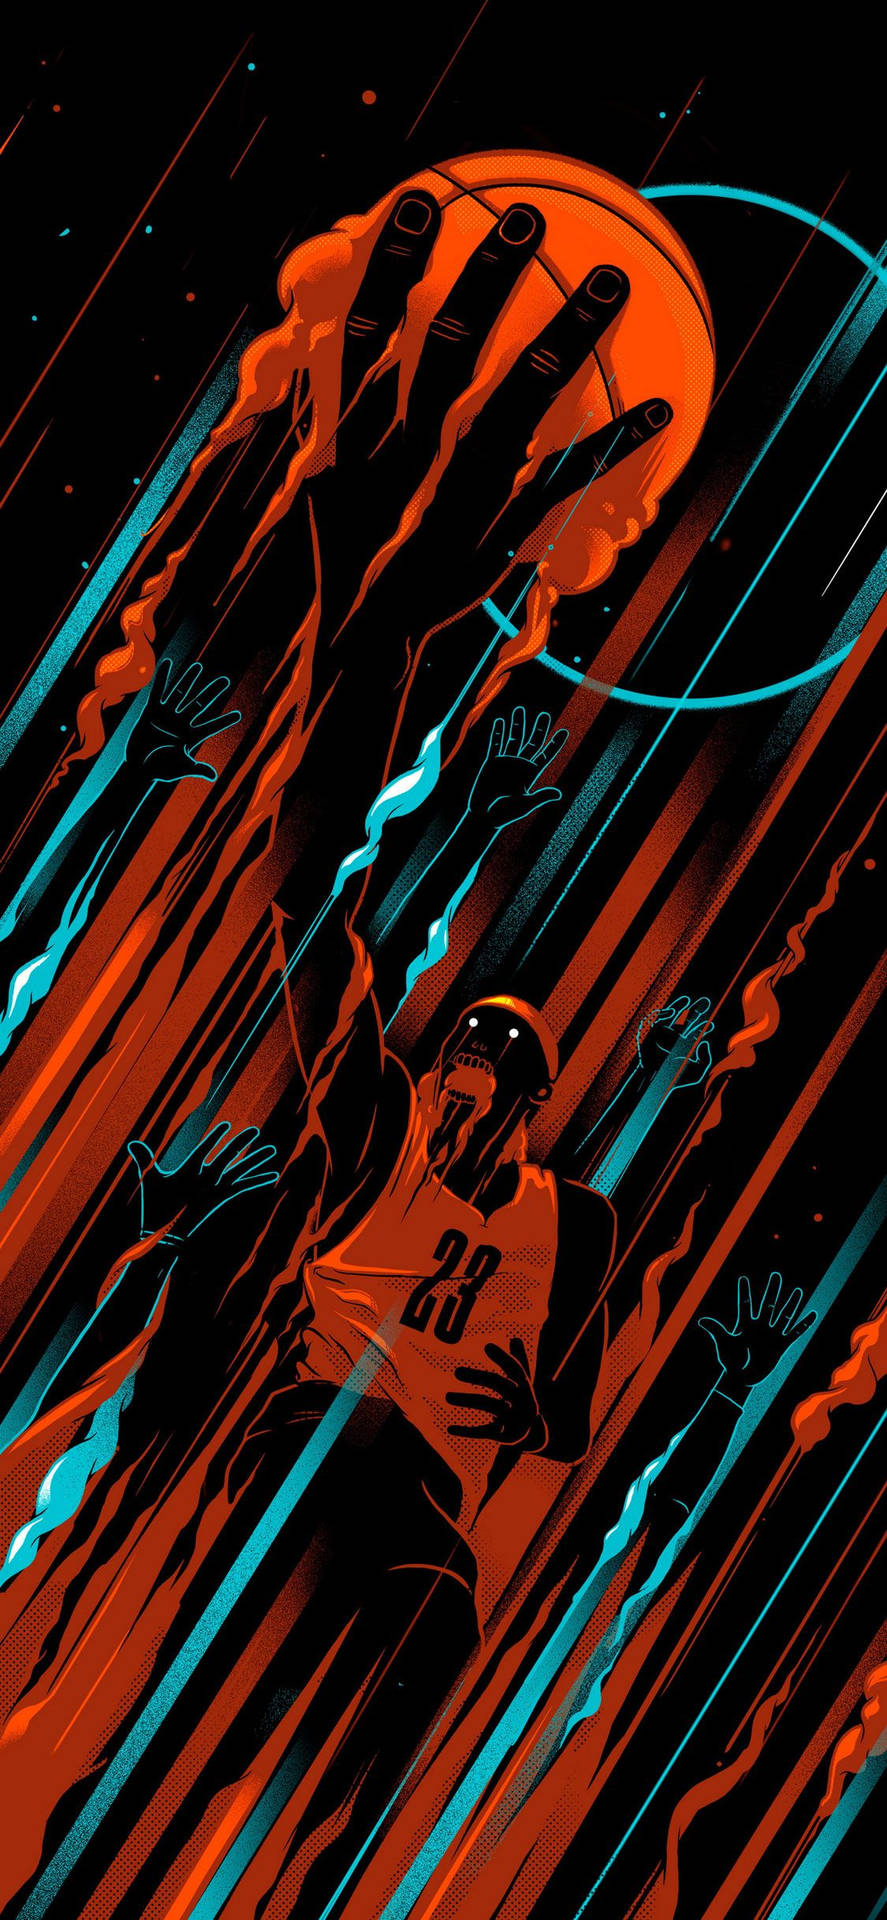 Two-toned Basketball Poster Design